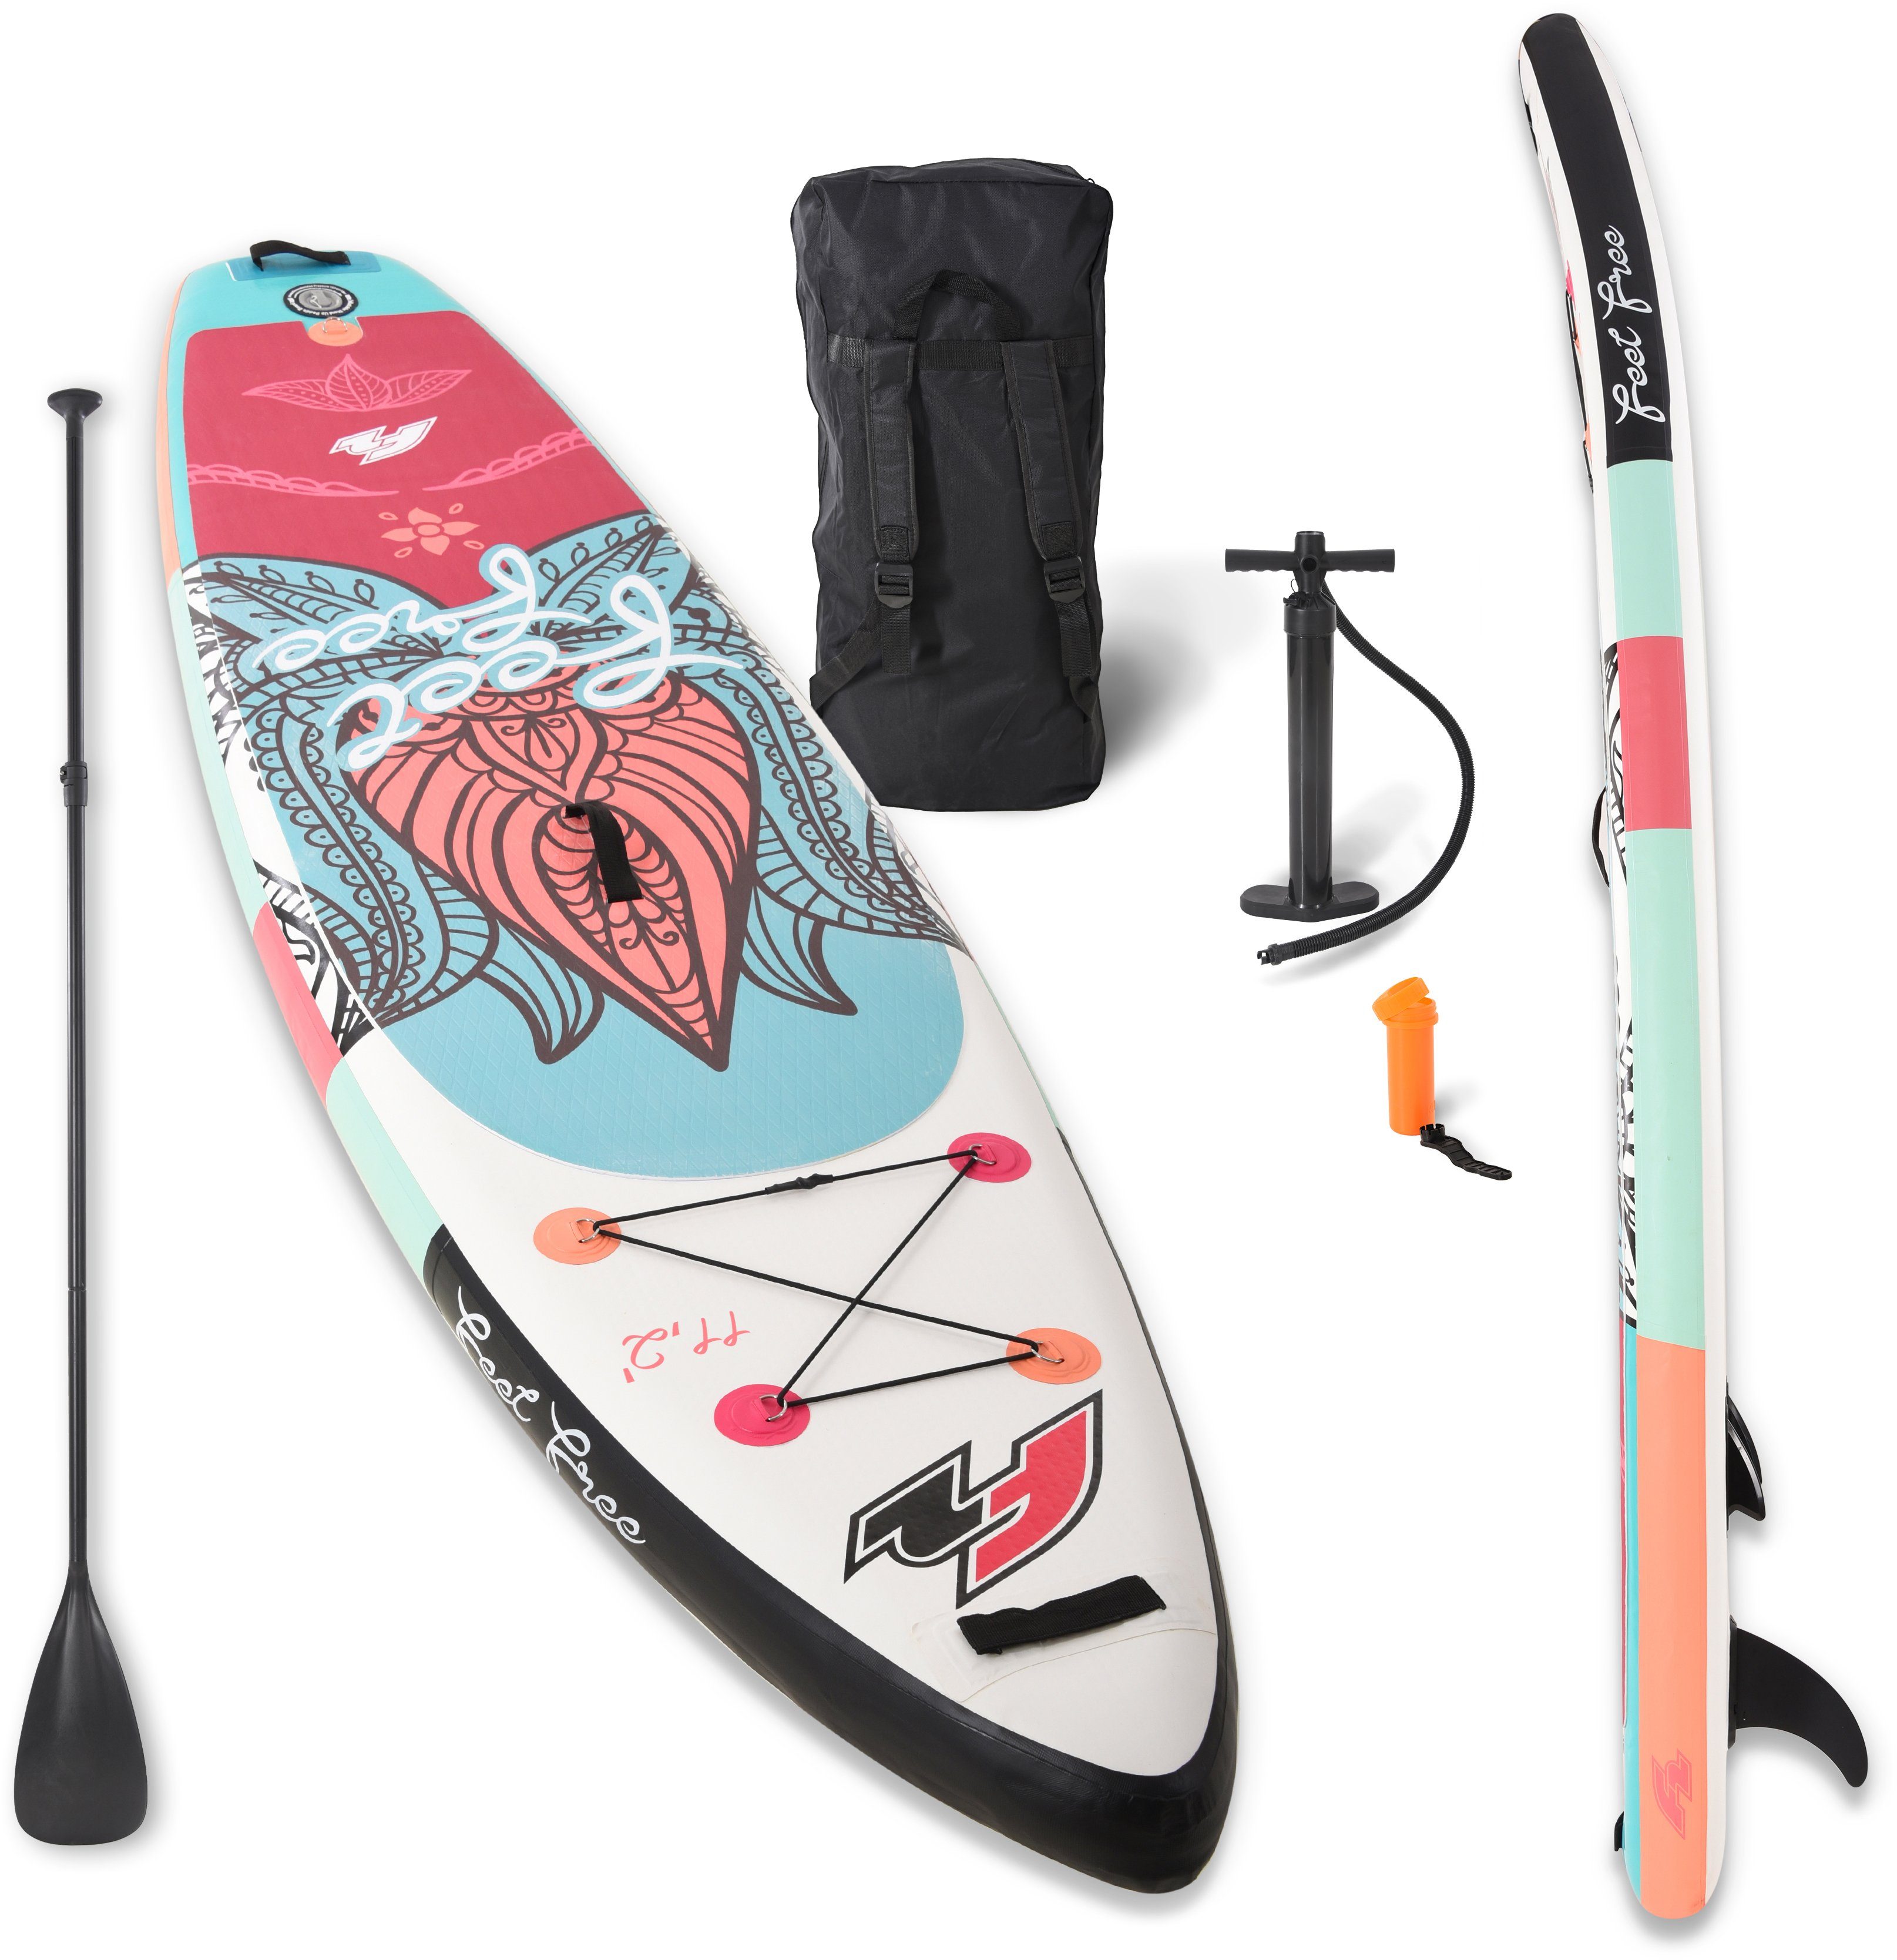 Diese Woche beliebt Paddling SUP-Board Free, Stand Feel Up F2